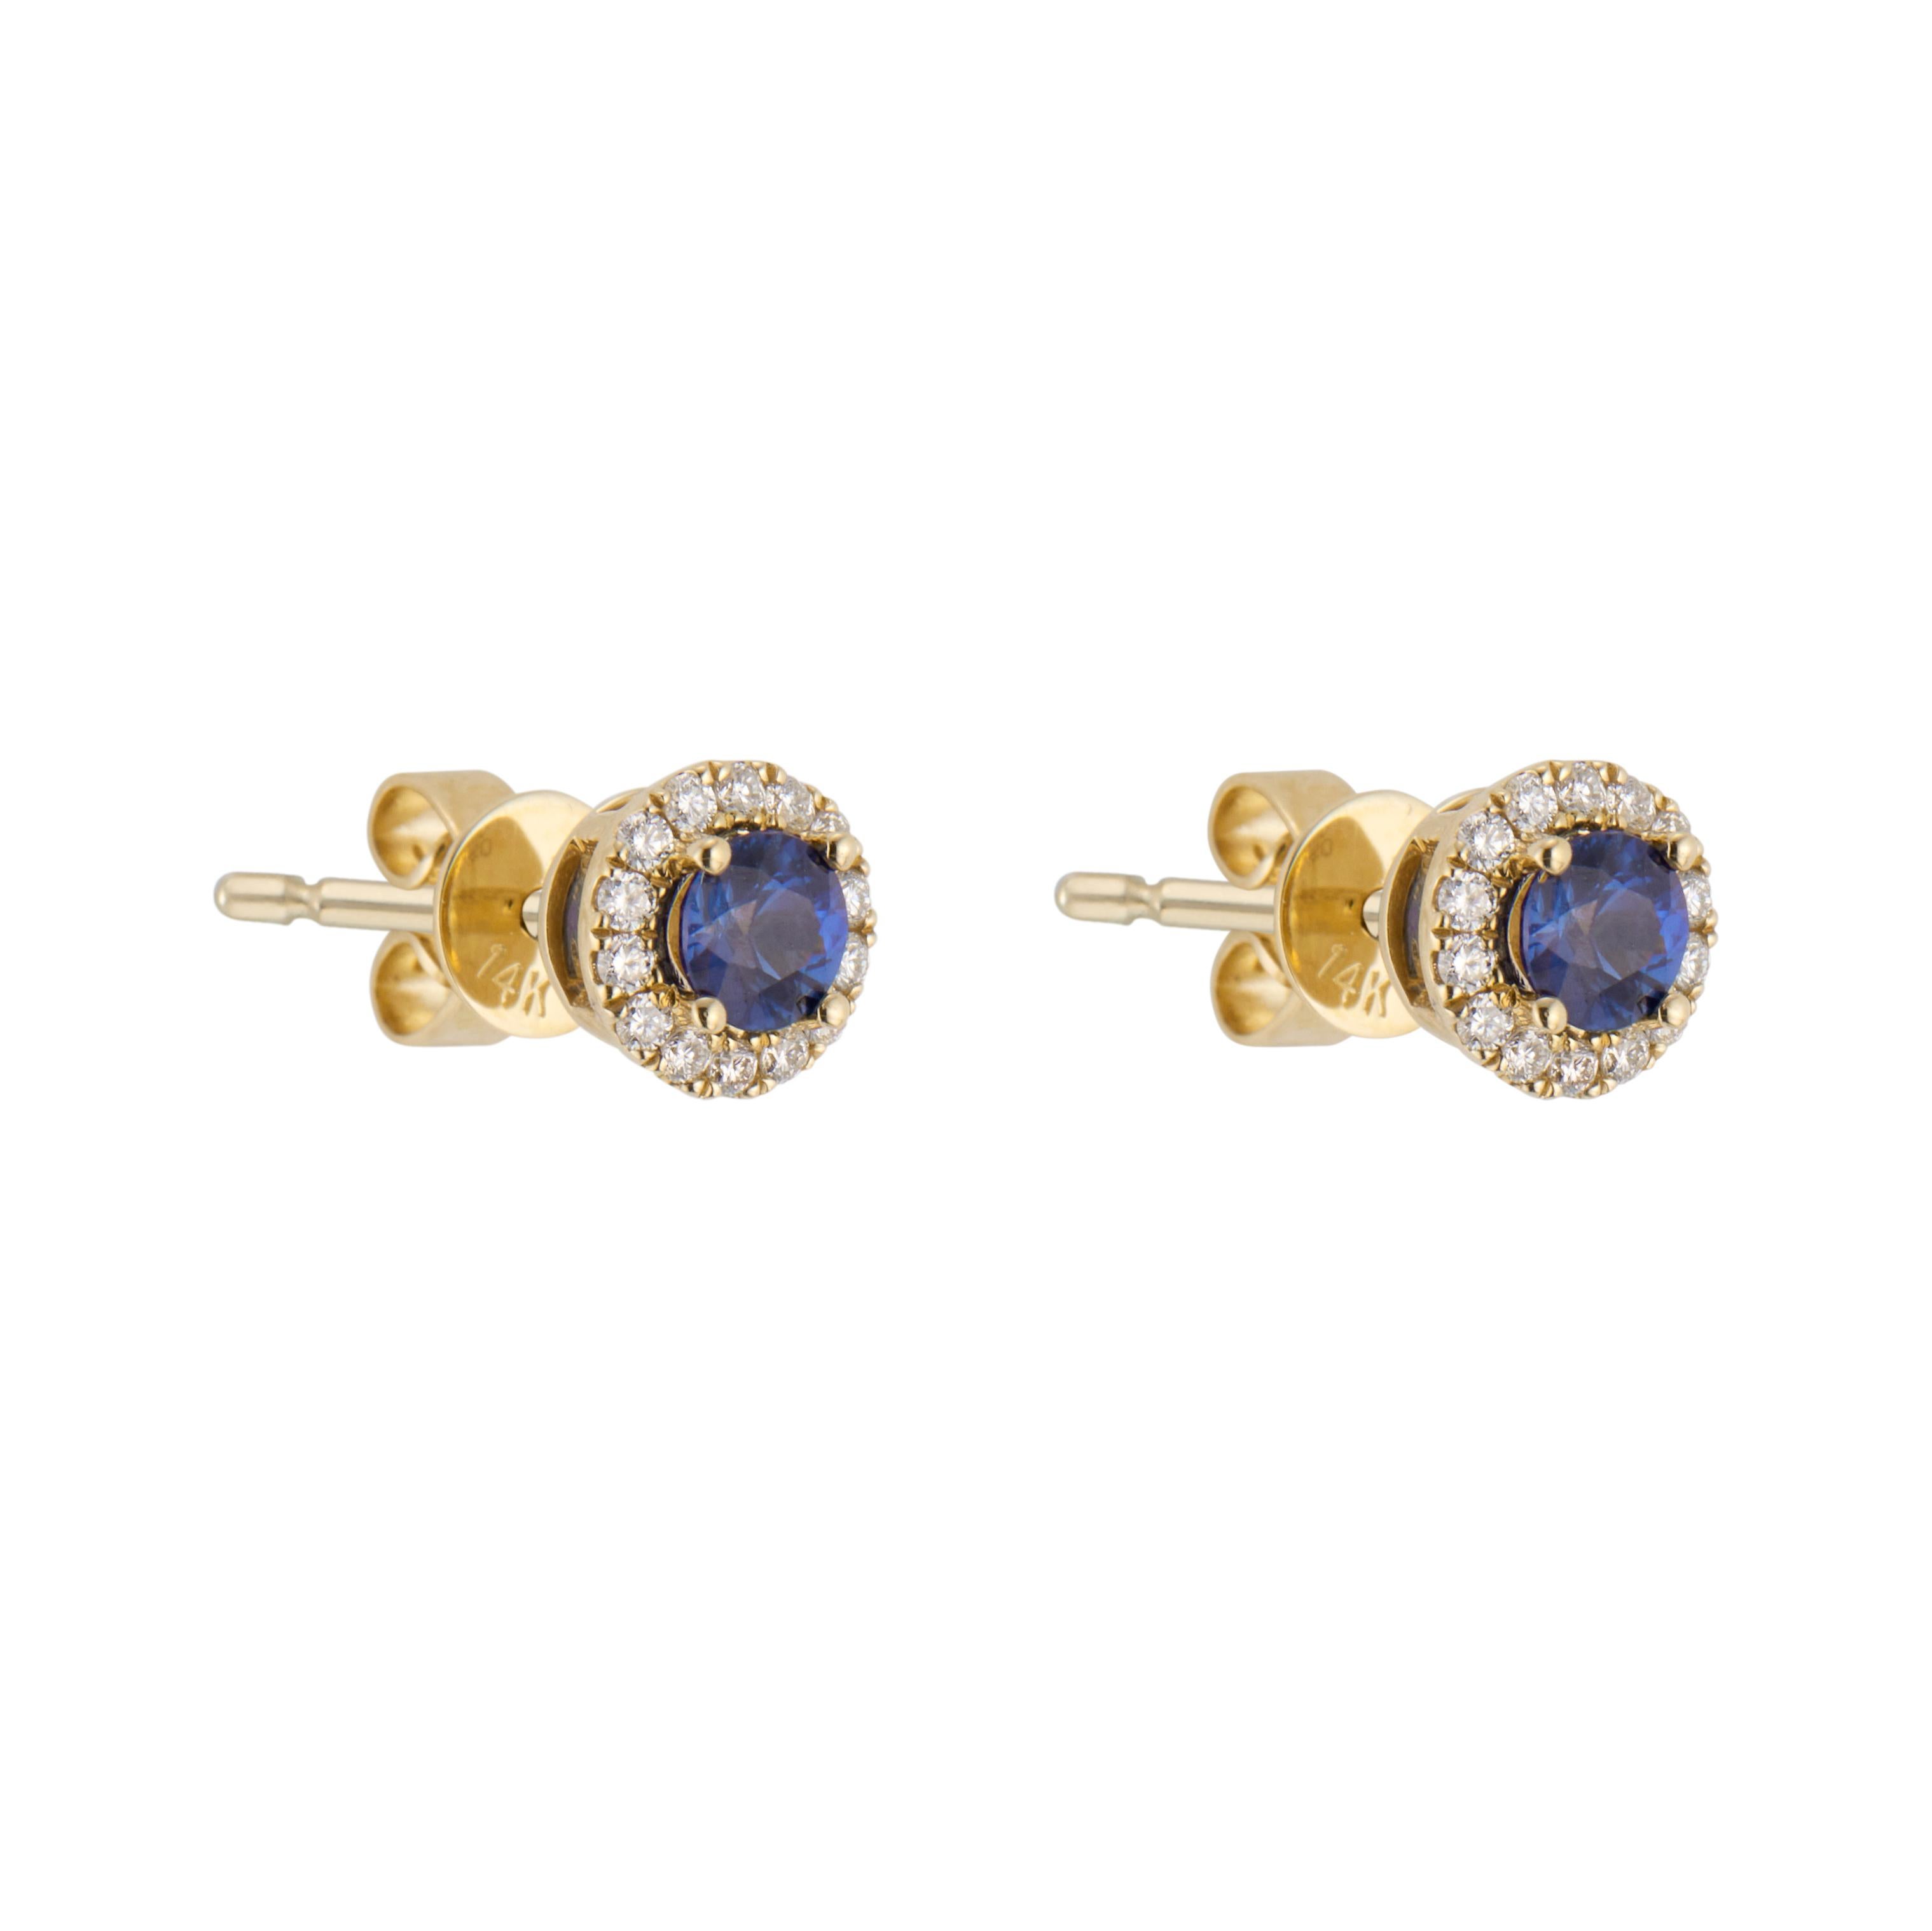 Sapphire and diamond stud earrings. 2 round blue sapphires, each with round cut diamond halos set in 14k yellow gold 4 prong settings. 

2 round blue sapphire, approx. .60cts
28 round brilliant cut diamonds, approx. .11cts
14k yellow gold 
Stamped: